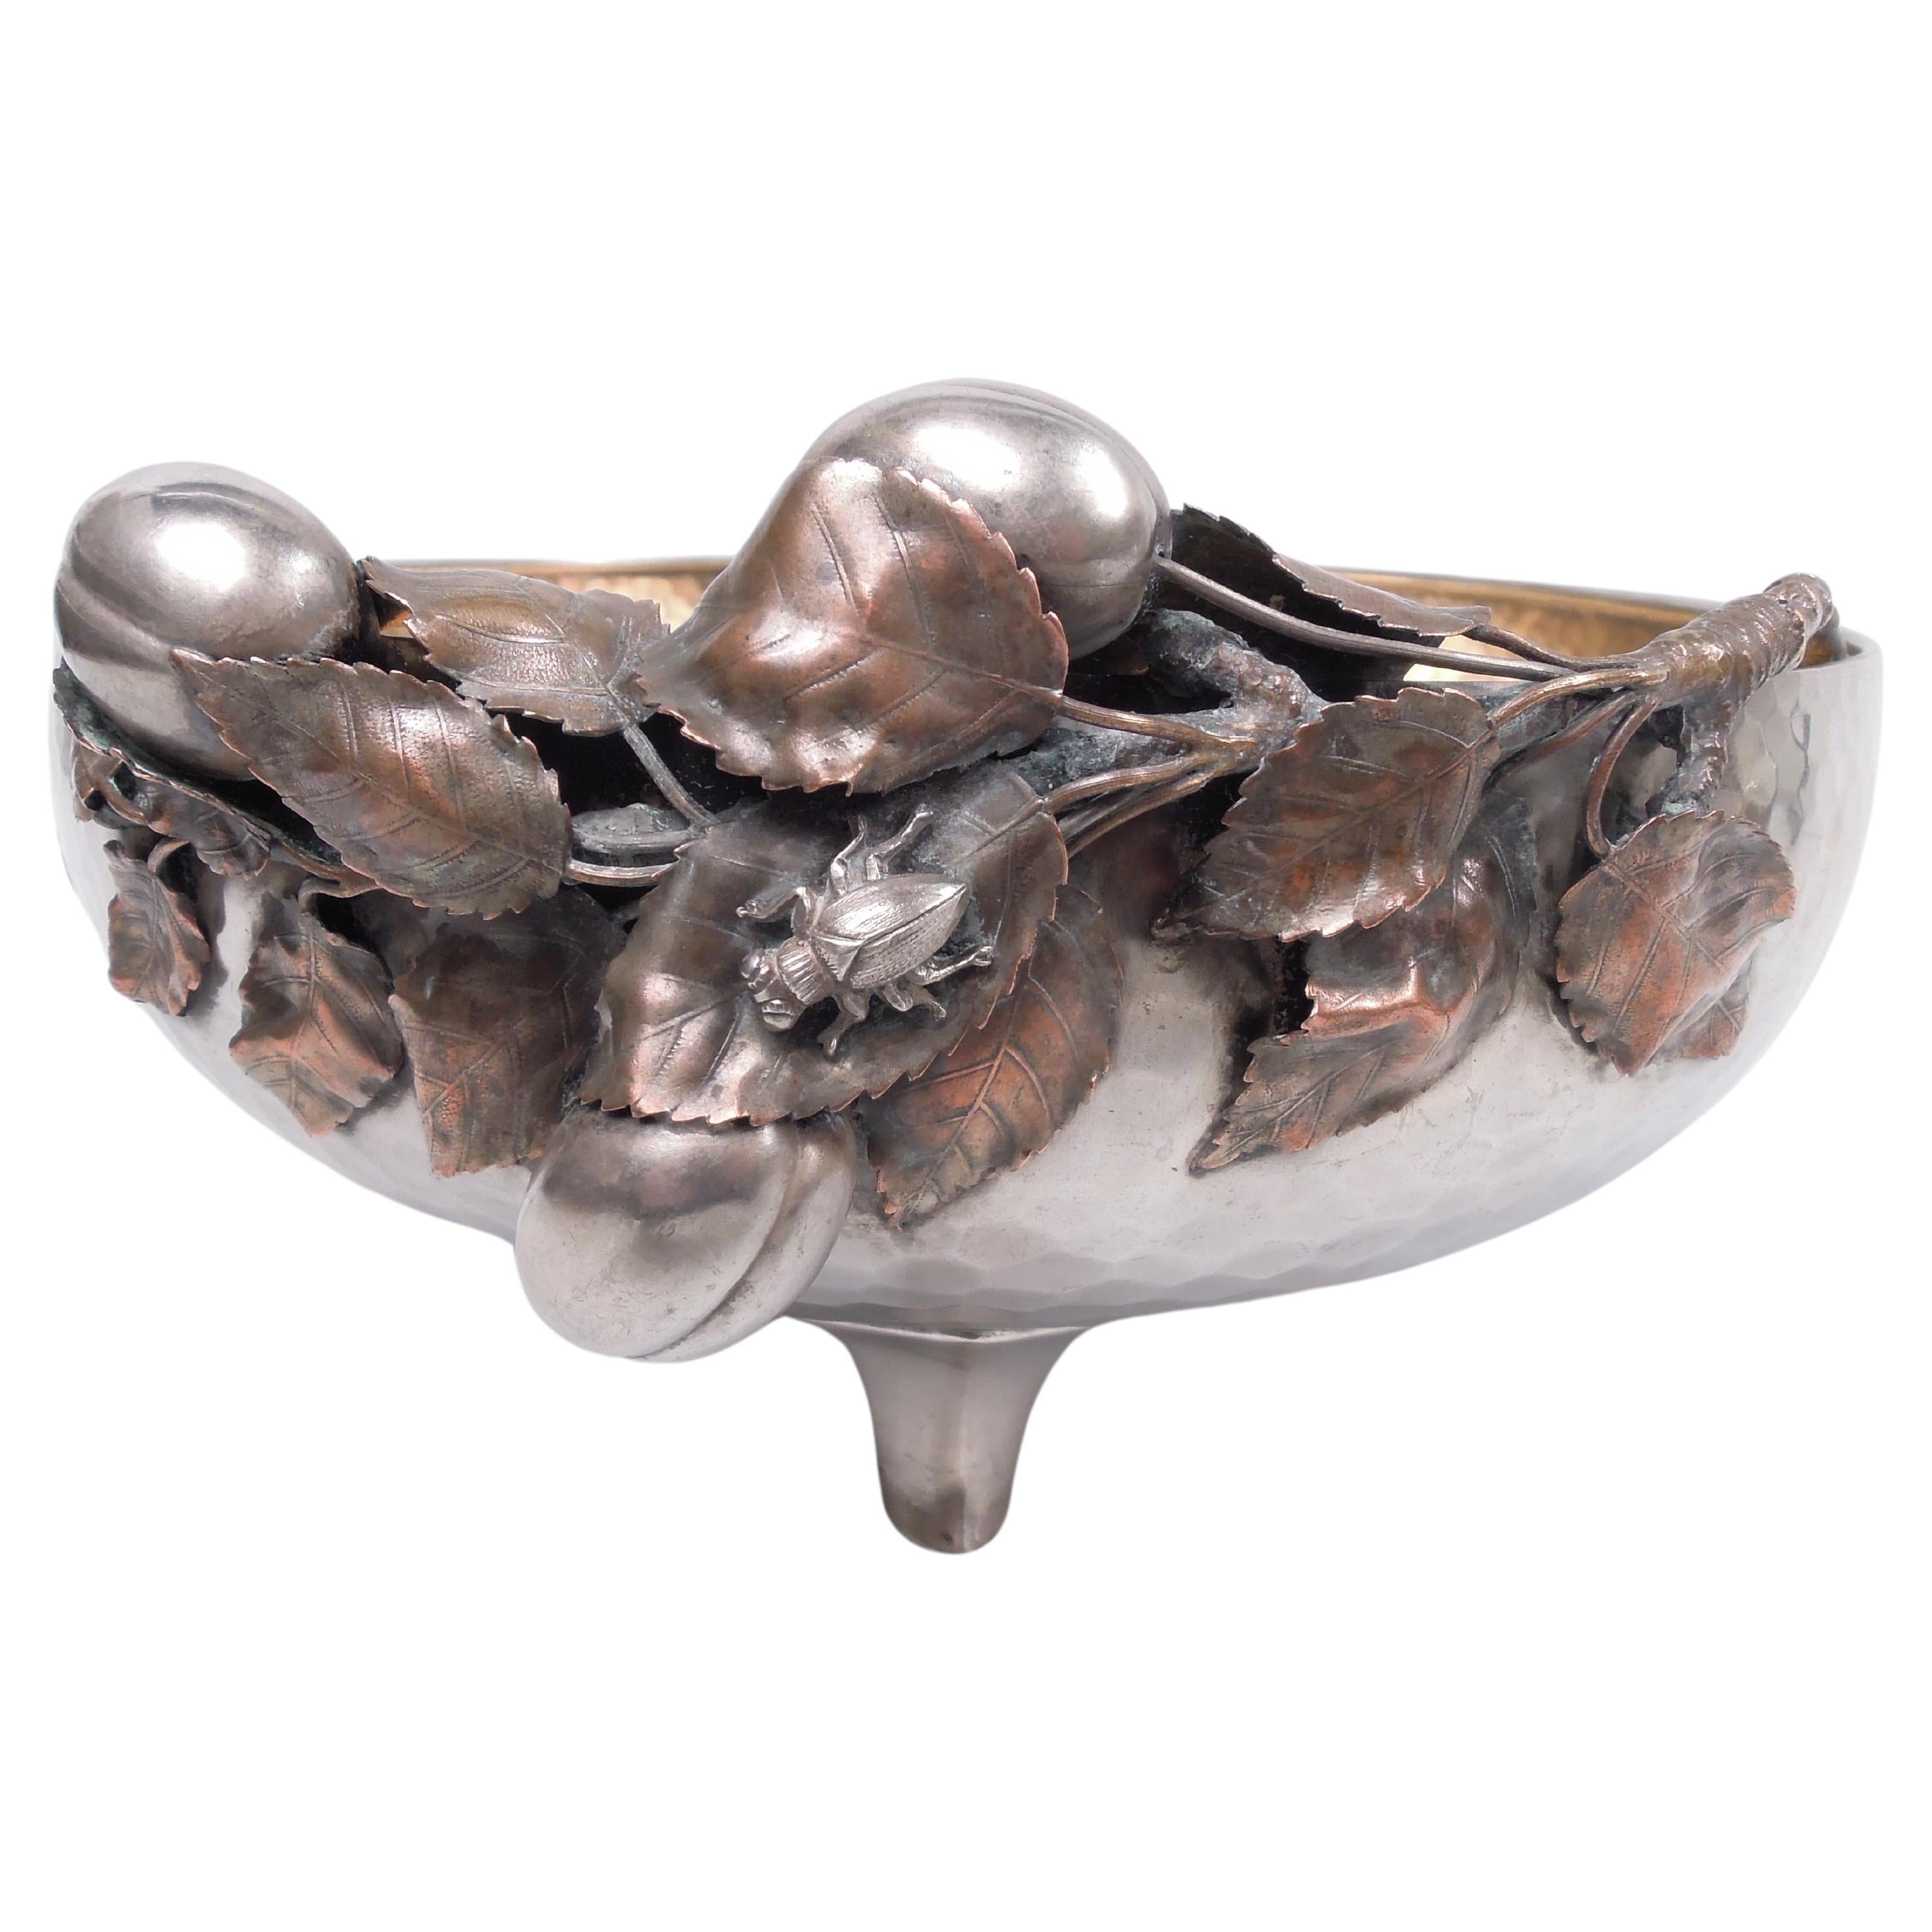 Gorham Japonesque Hand-Hammered Mixed Metal Dragonfly Bowl, 1883 For Sale